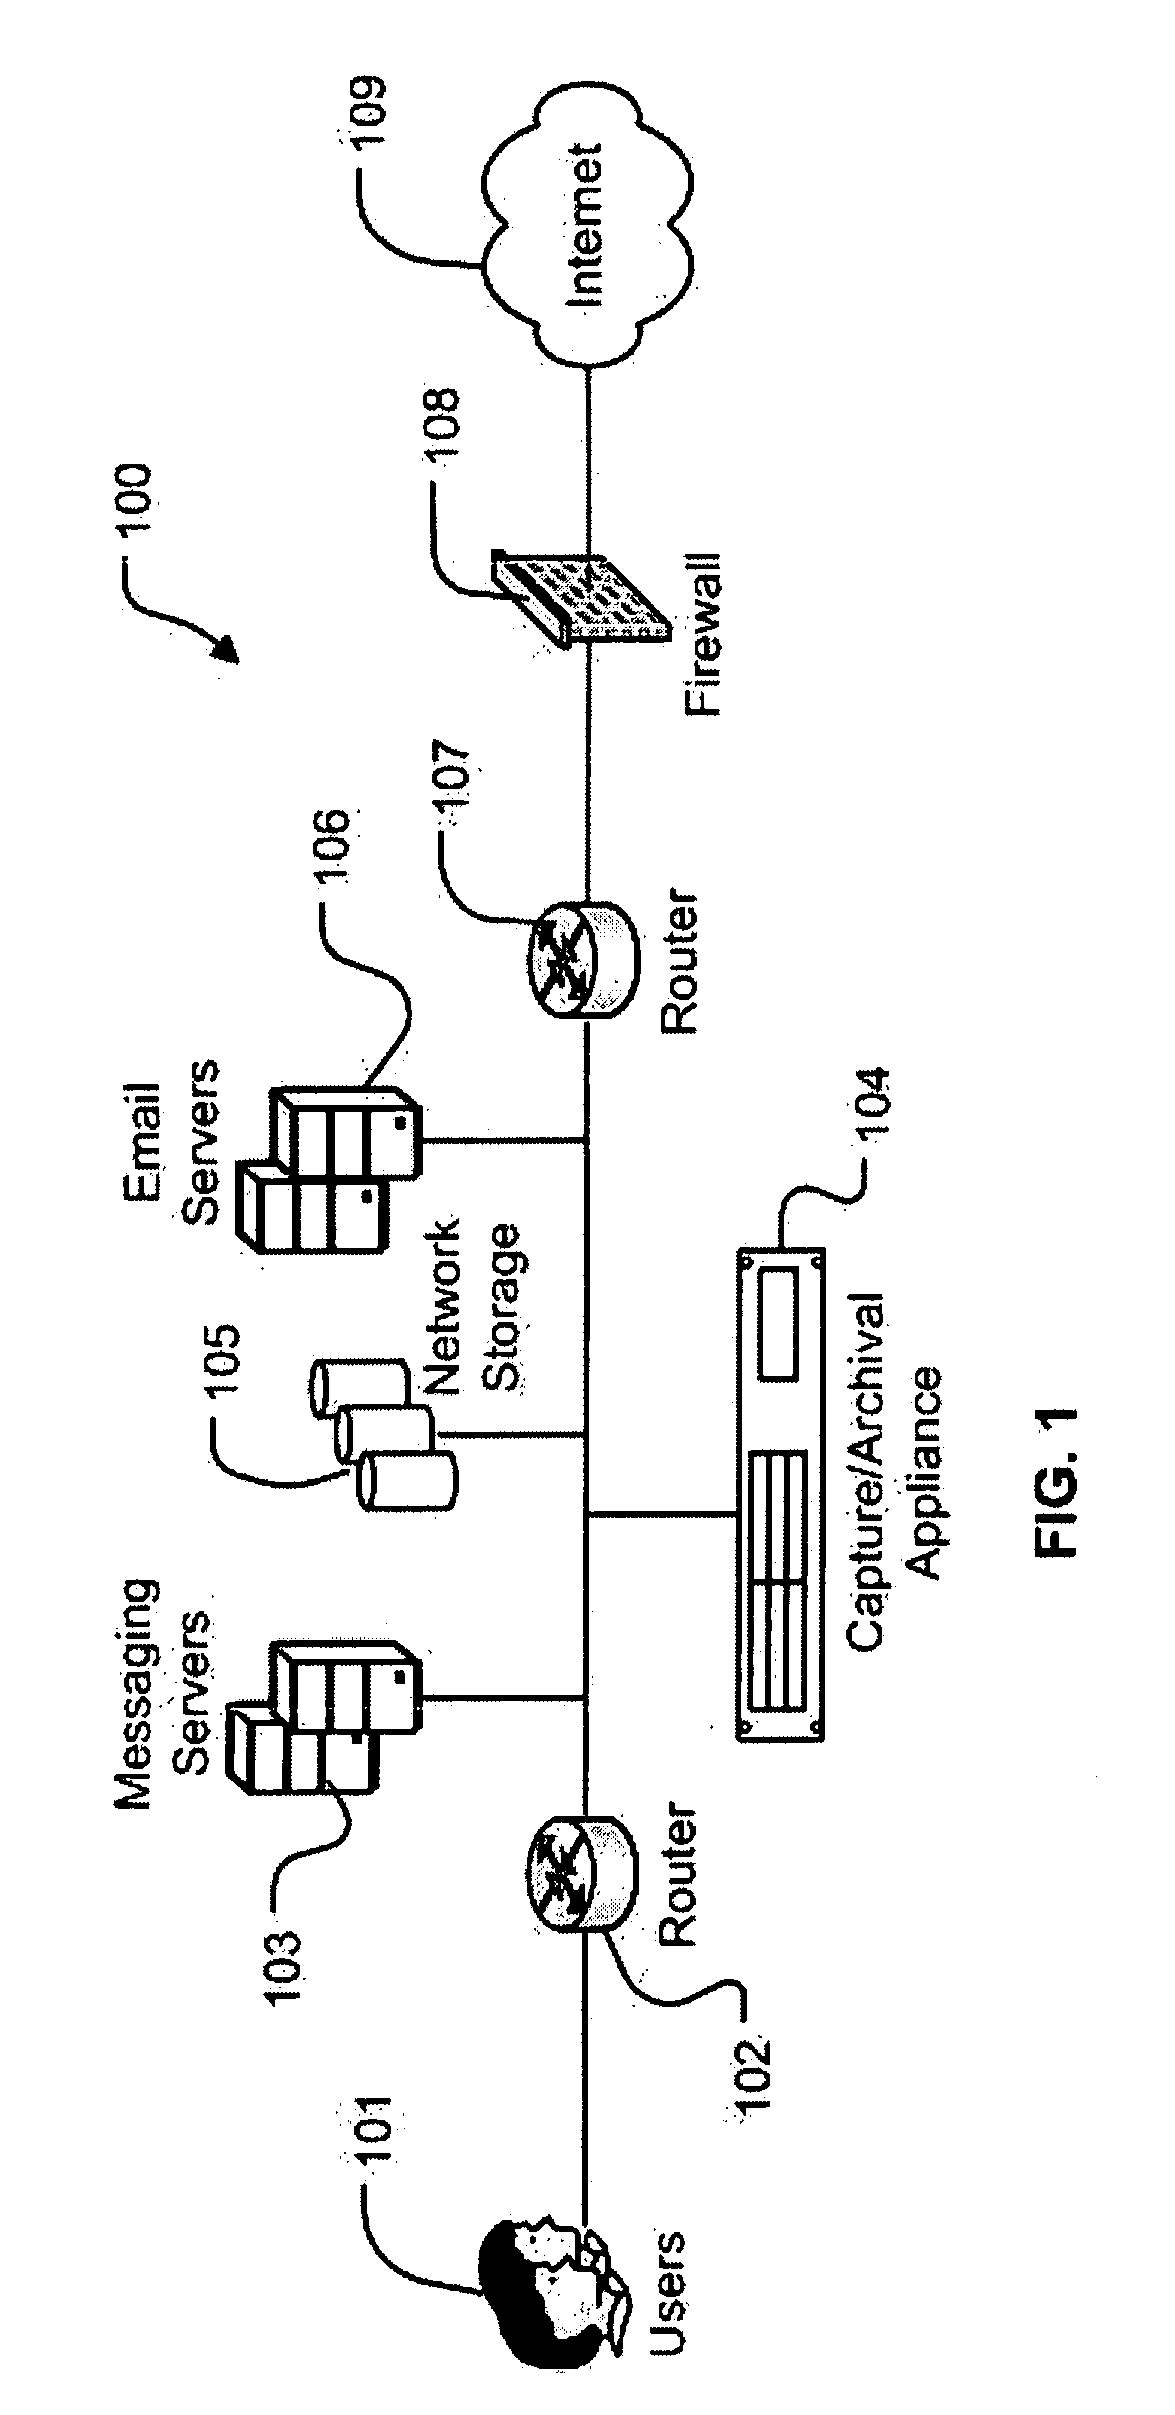 System and Method for the Capture and Archival of Electronic Communications